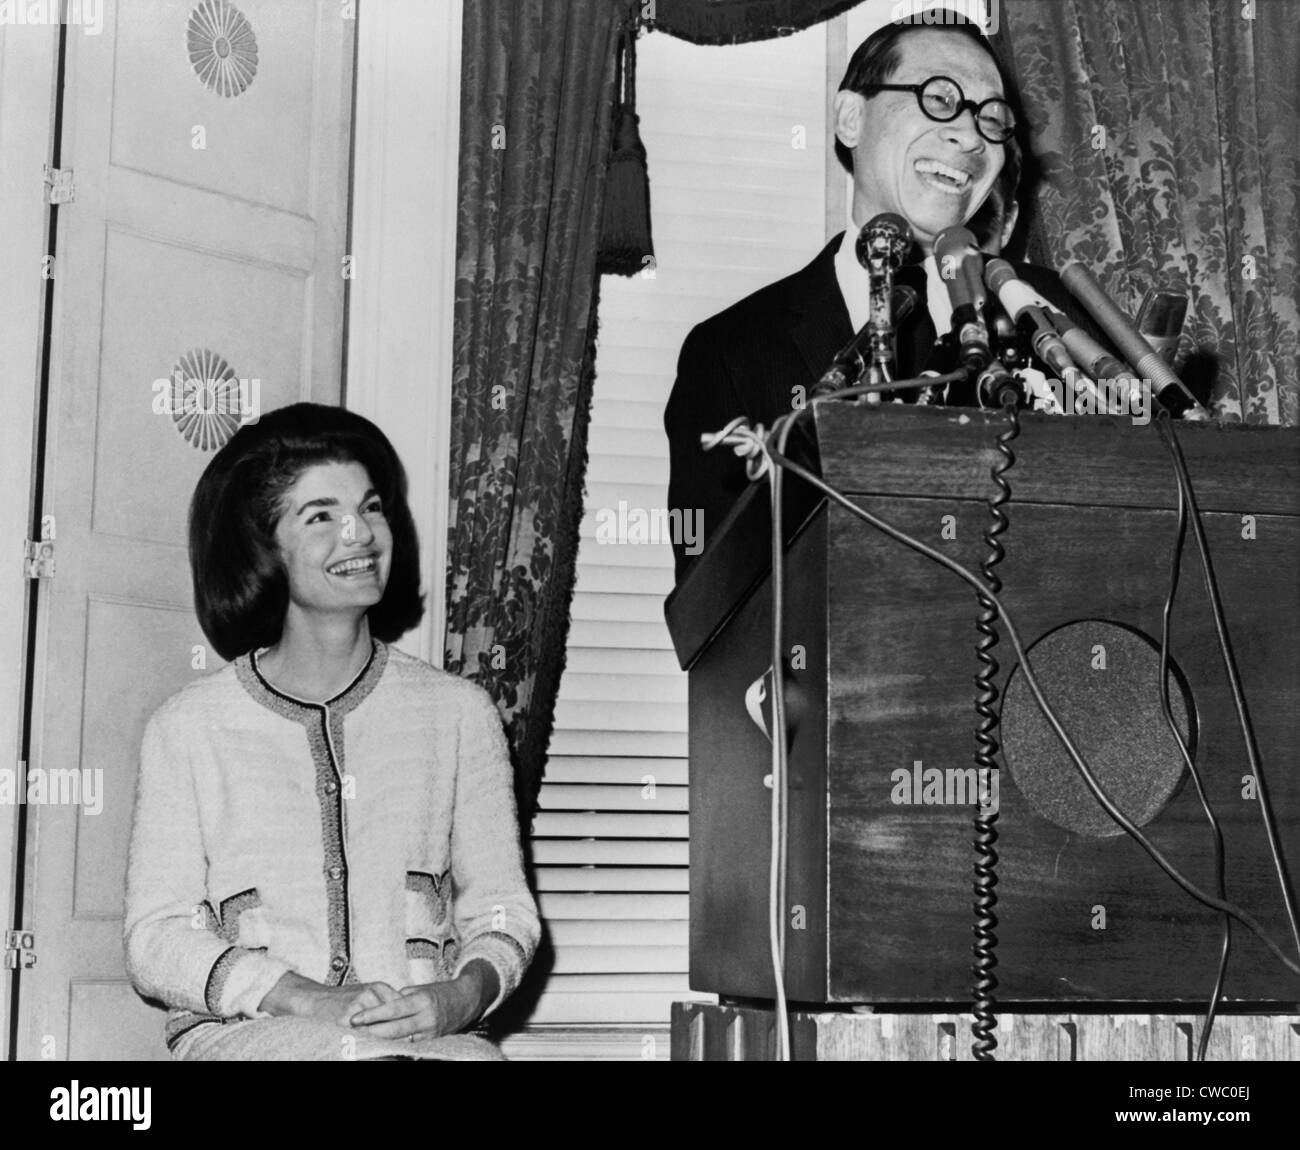 Architect Ieoh Ming Pei was chosen to design the John F. Kennedy Memorial Library in 1964. He speaks at a press conference Stock Photo